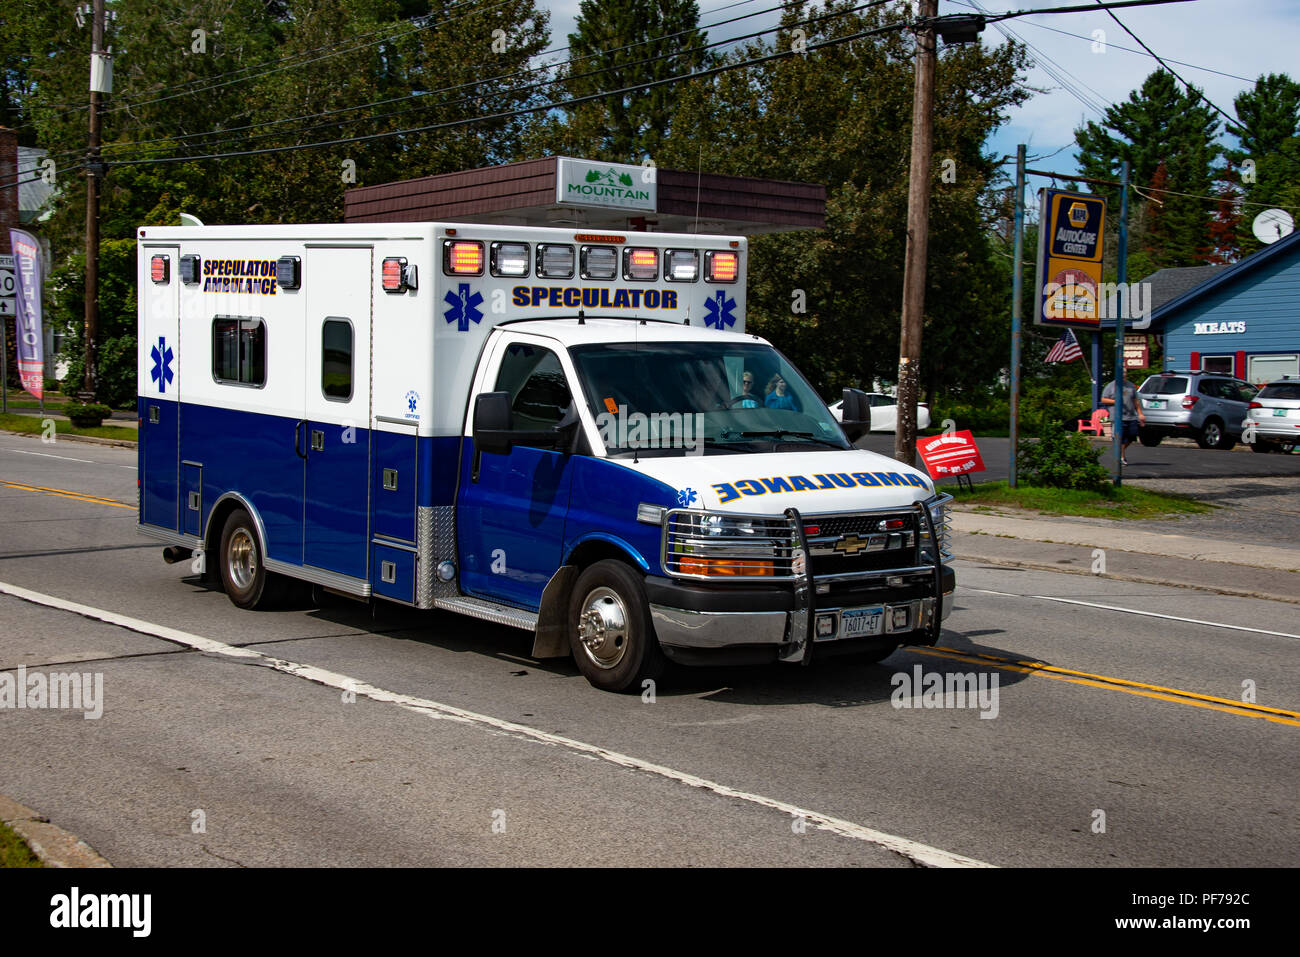 The Speculator ambulance racing through Speculator, NY USA responding to an emergency with lights flashing. Stock Photo